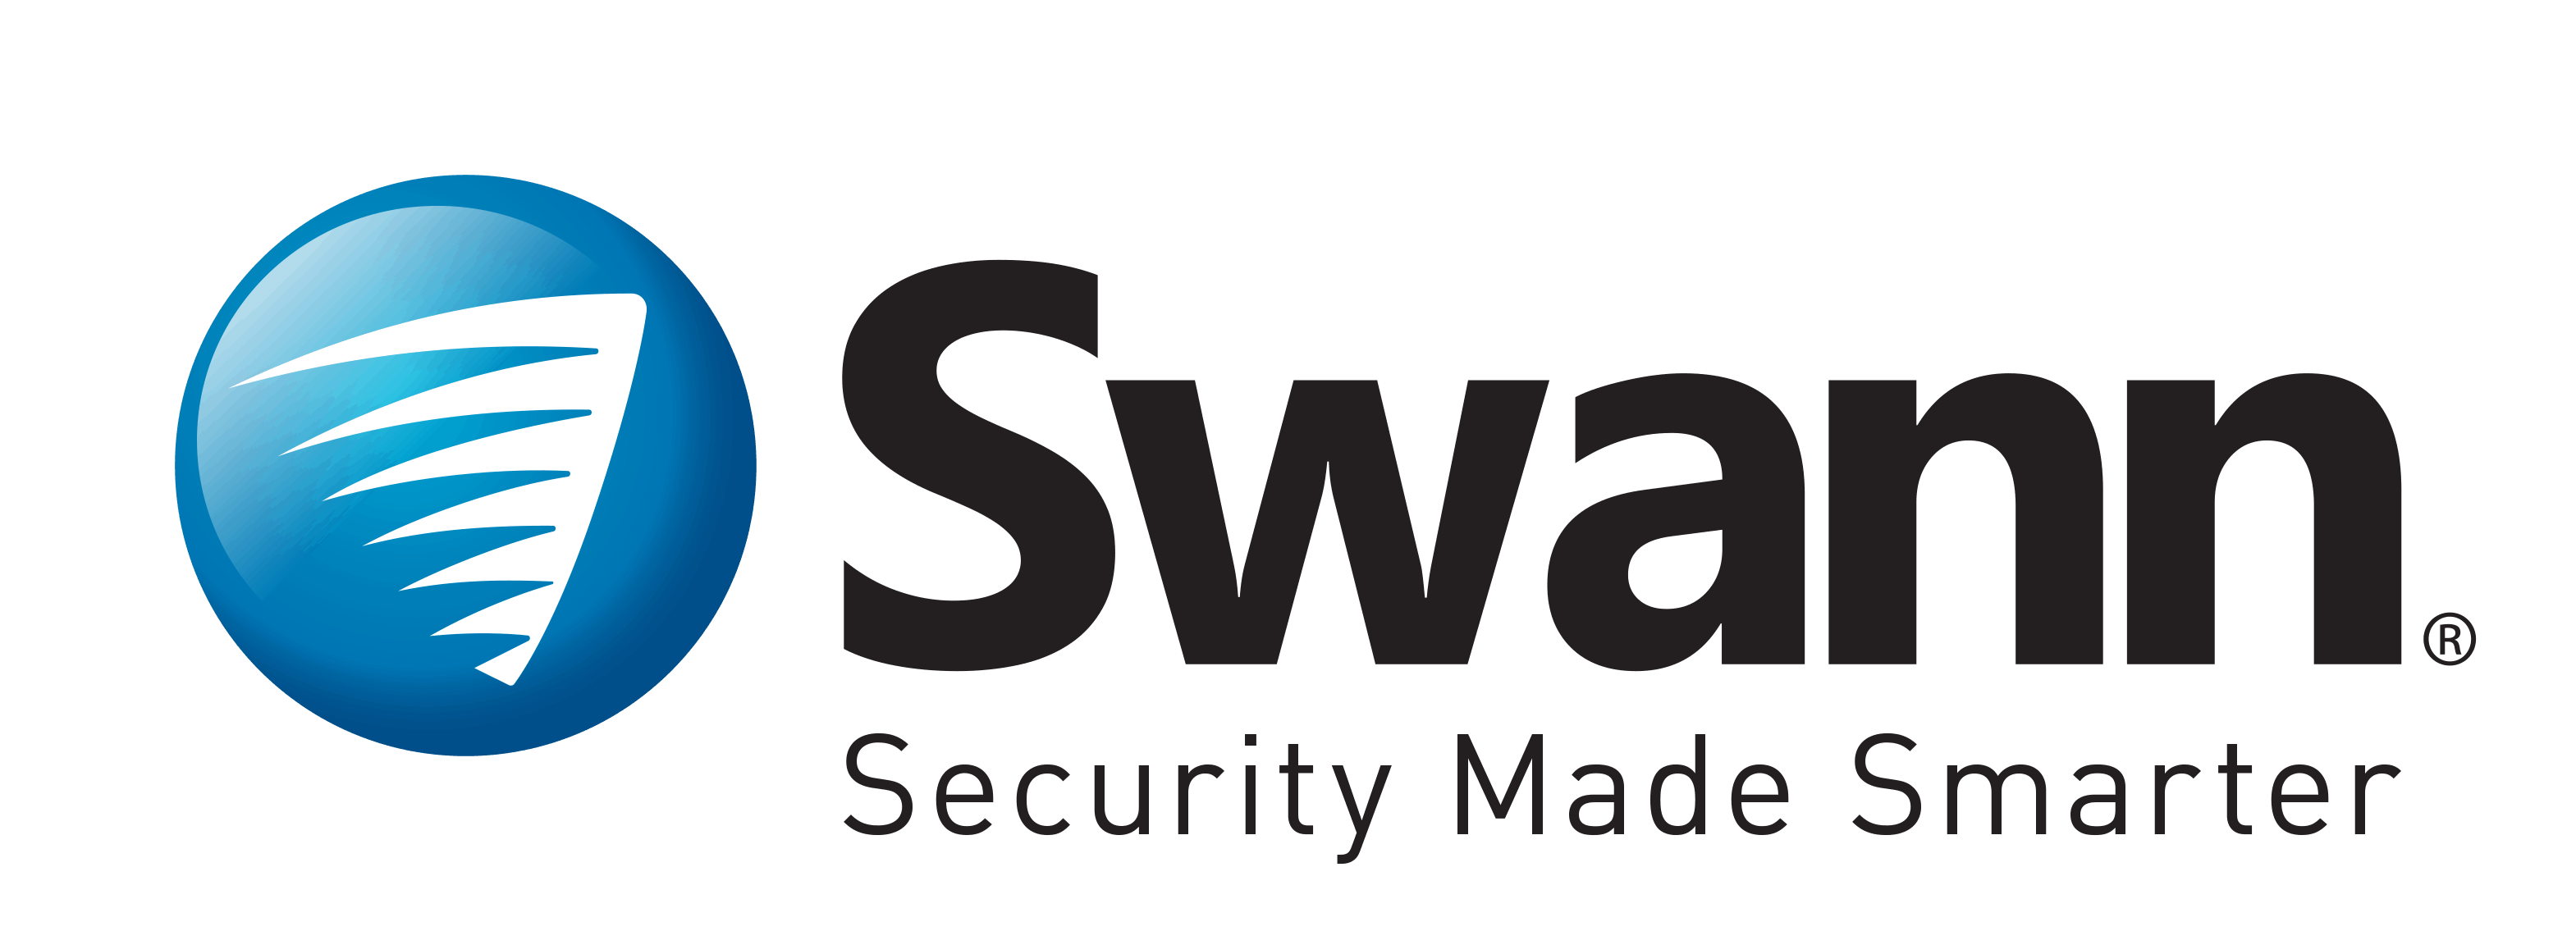 Swann Security Cameras | Swann Security System Cost, Price &amp; Packs